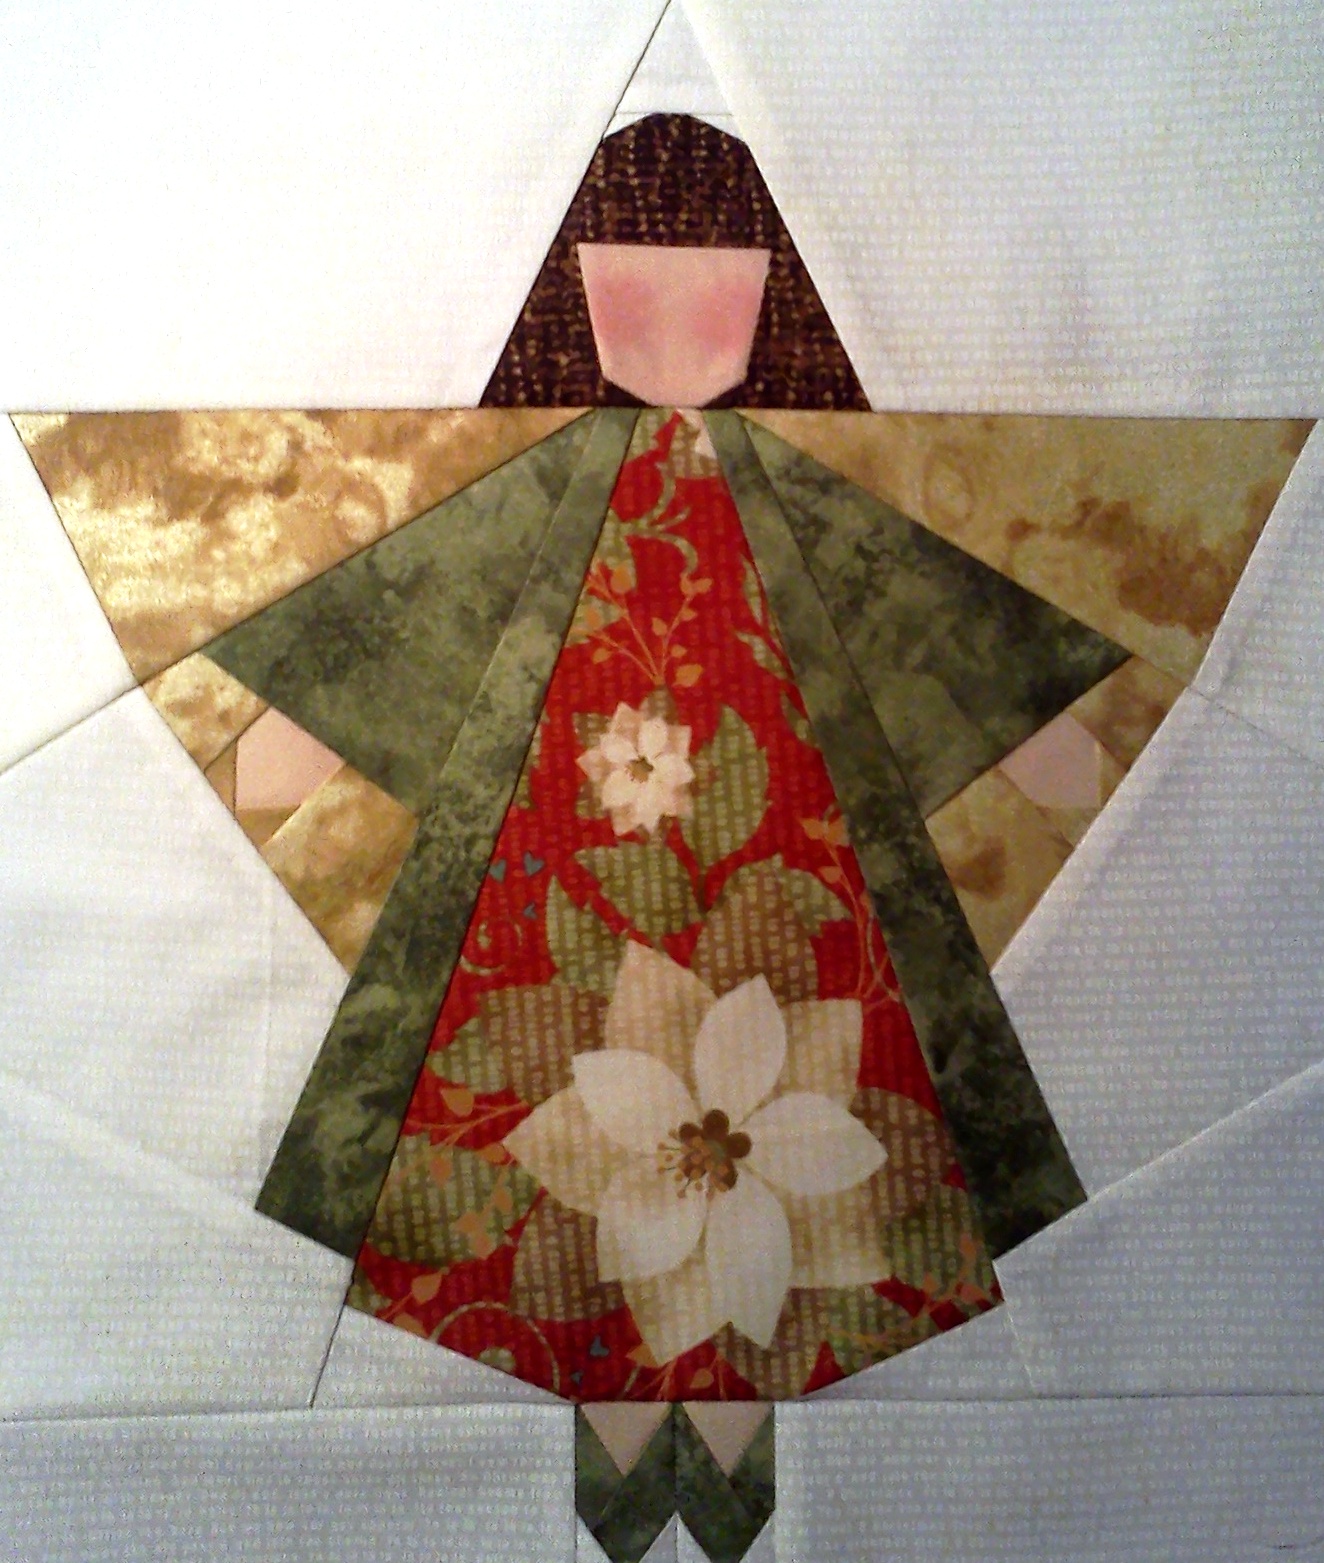 Larkspur Lane Designs: Just finished another Christmas Angel!